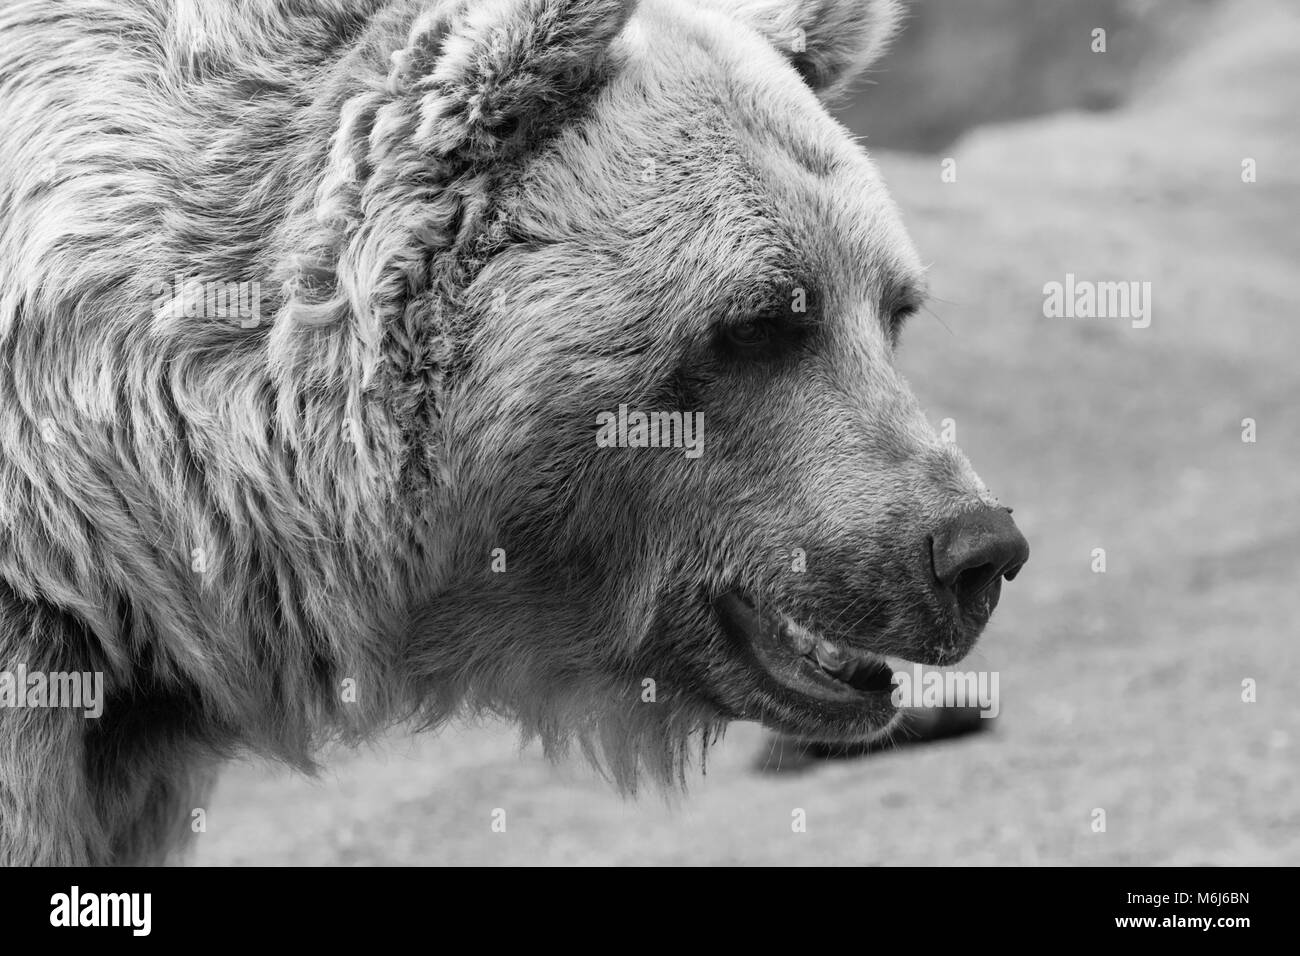 a detailed close up of a bears face in black and white Stock Photo